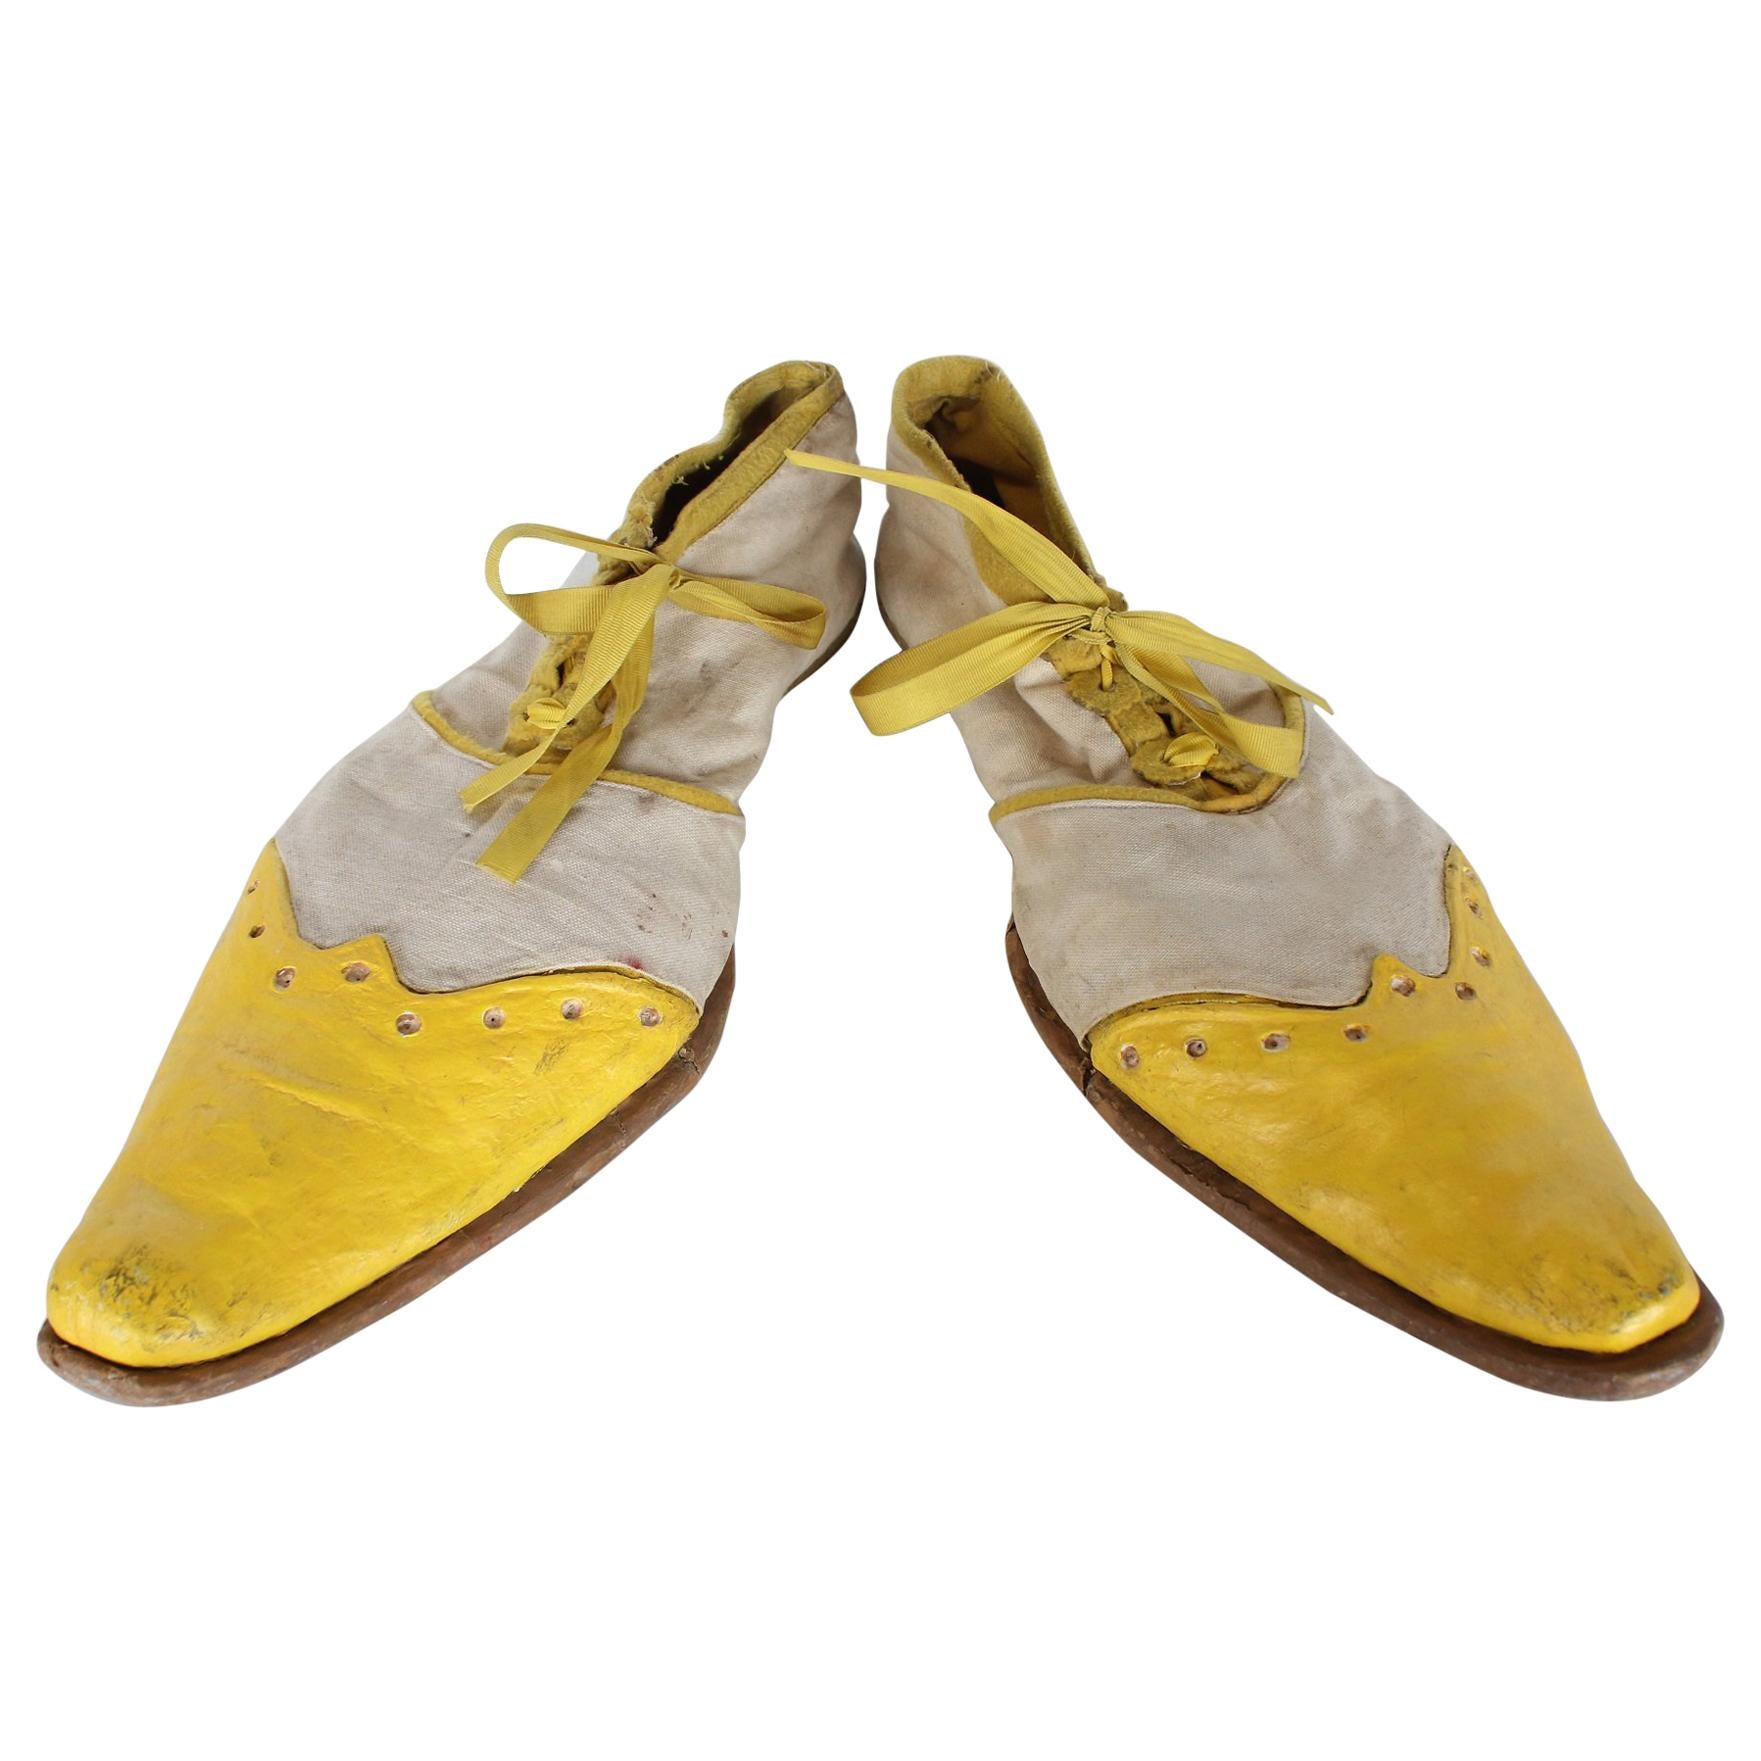 1950s Hand Made Clown Shoes